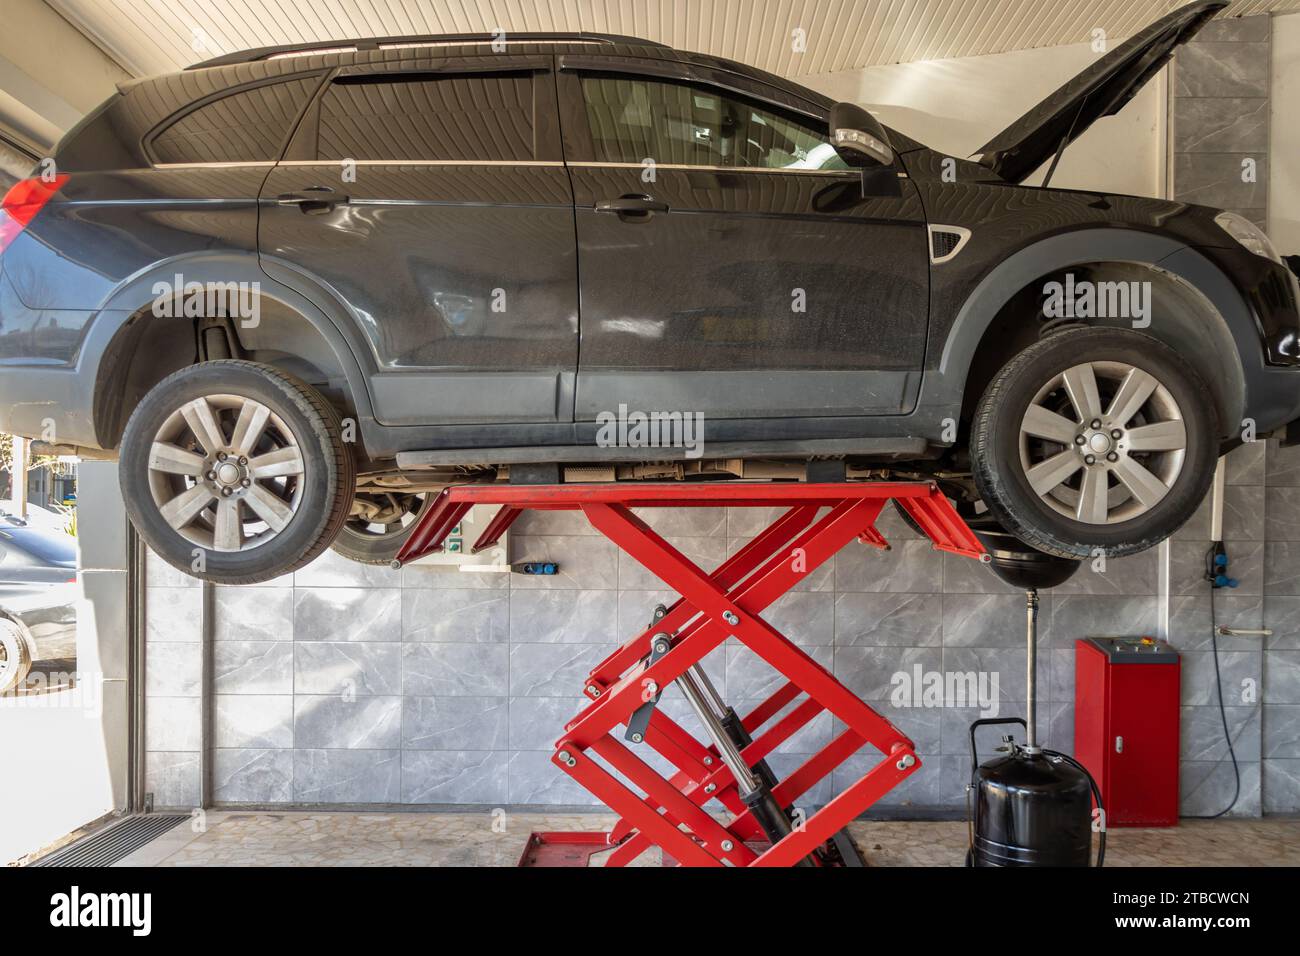 The car, whose repair is completed at the service station, is taken off the lift. Work area with car on high elevator in vehicle repair workshop Stock Photo